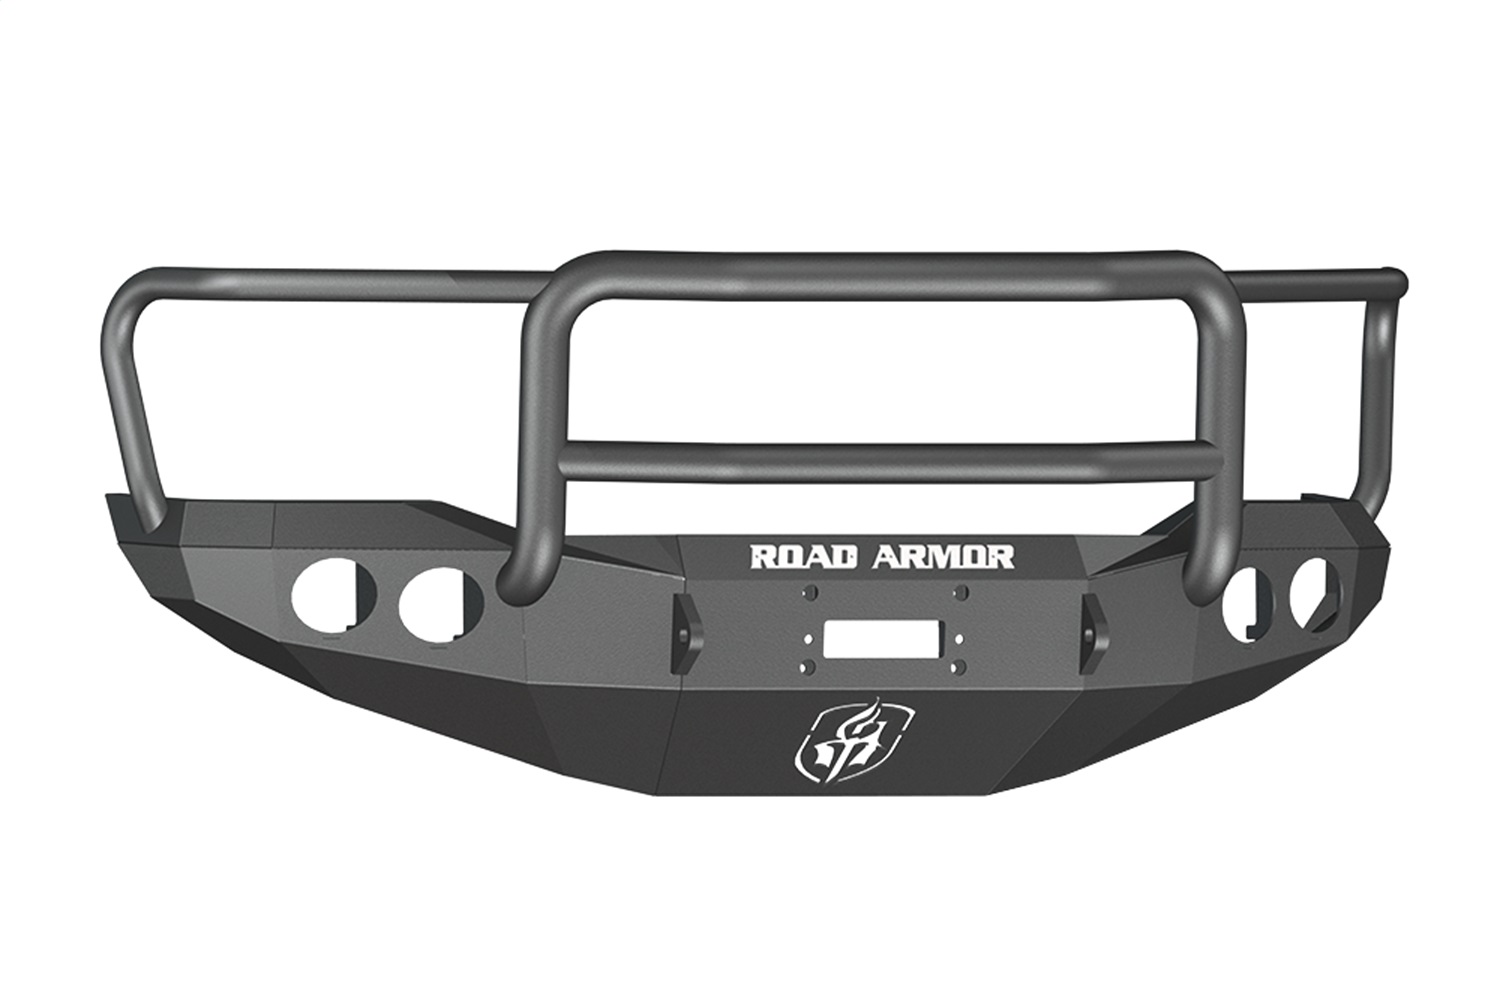 Road Armor Road Armor 99031B Front Stealth Bumper Fits 07-15 Tundra